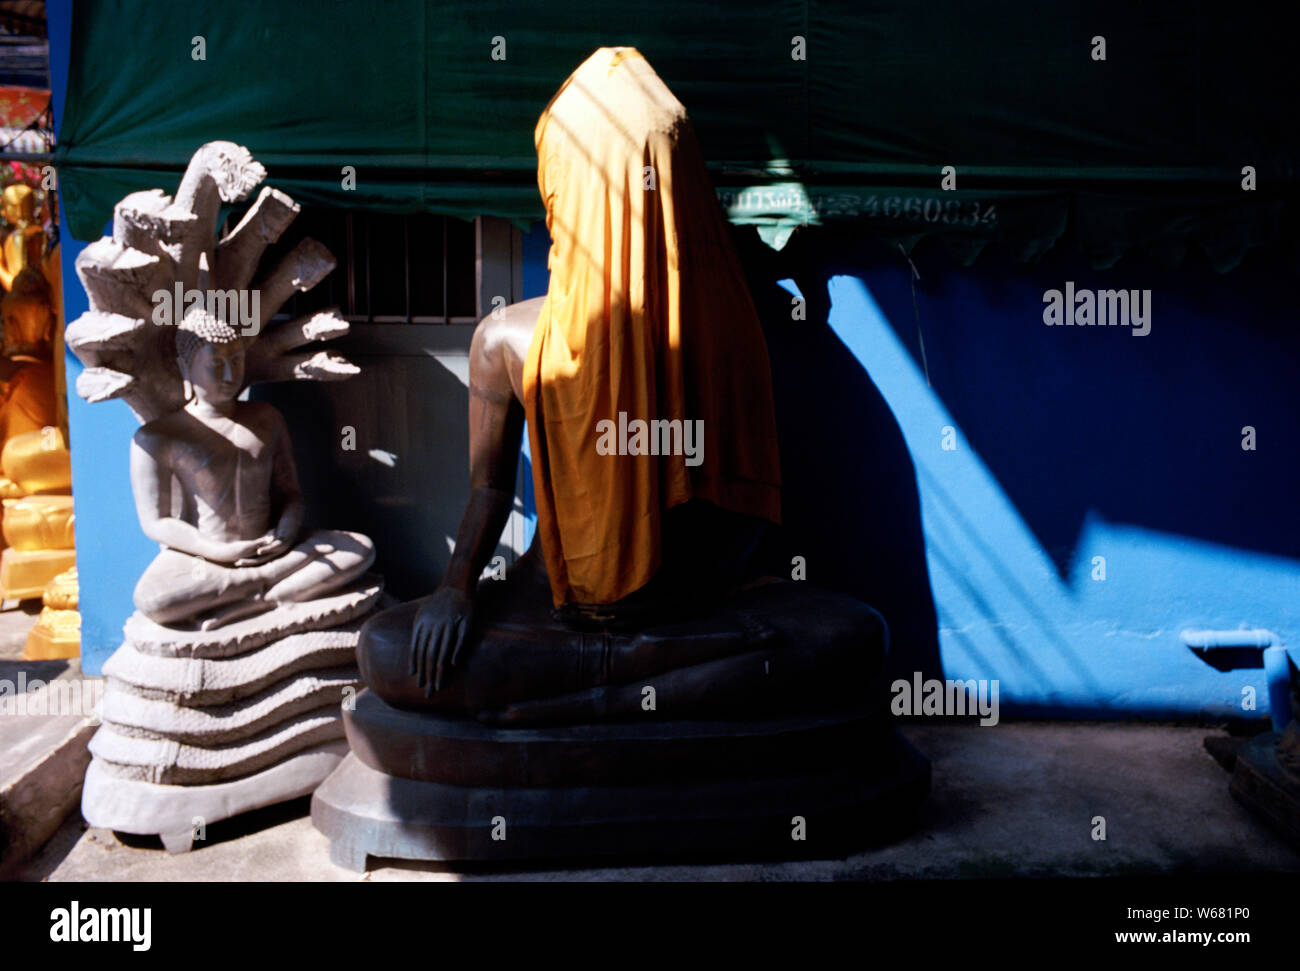 Buddha statues in Bamrung Muang Road in Bangkok in Thailand in Southeast Asia Far East. Buddhism Mindfulness Wellbeing Meditate Meditating Stock Photo